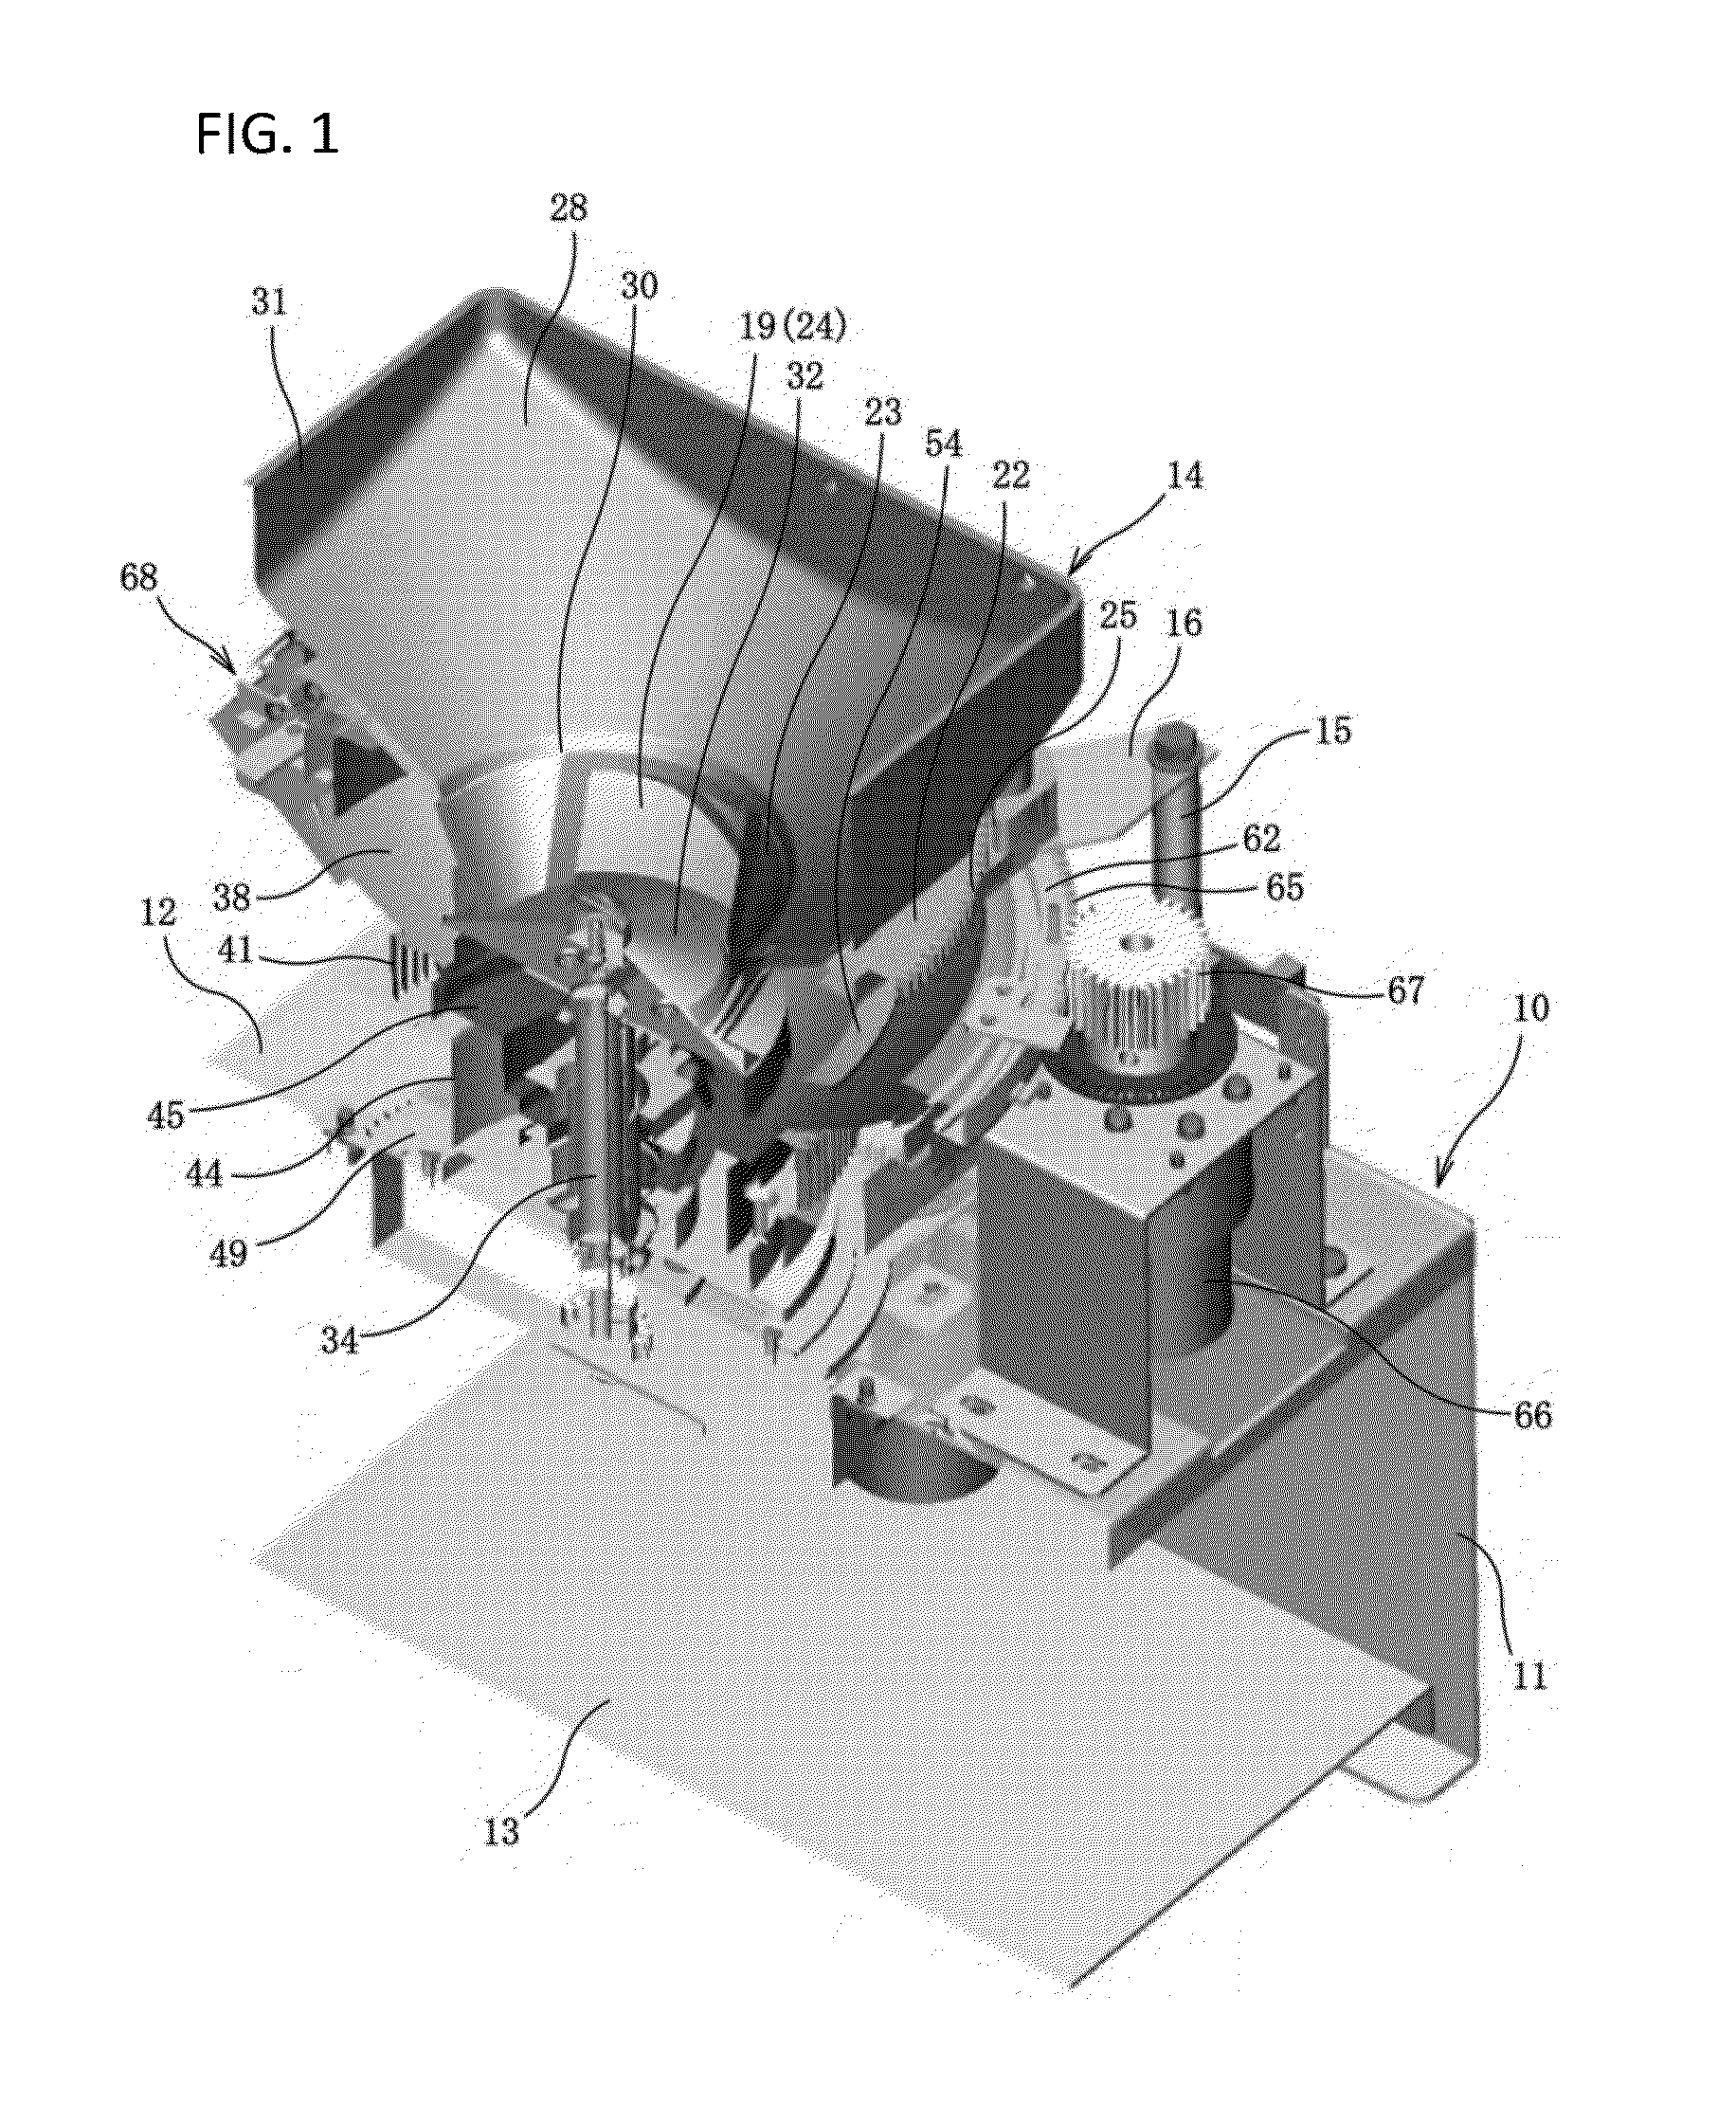 Medicine feeding device, and medicine counting device